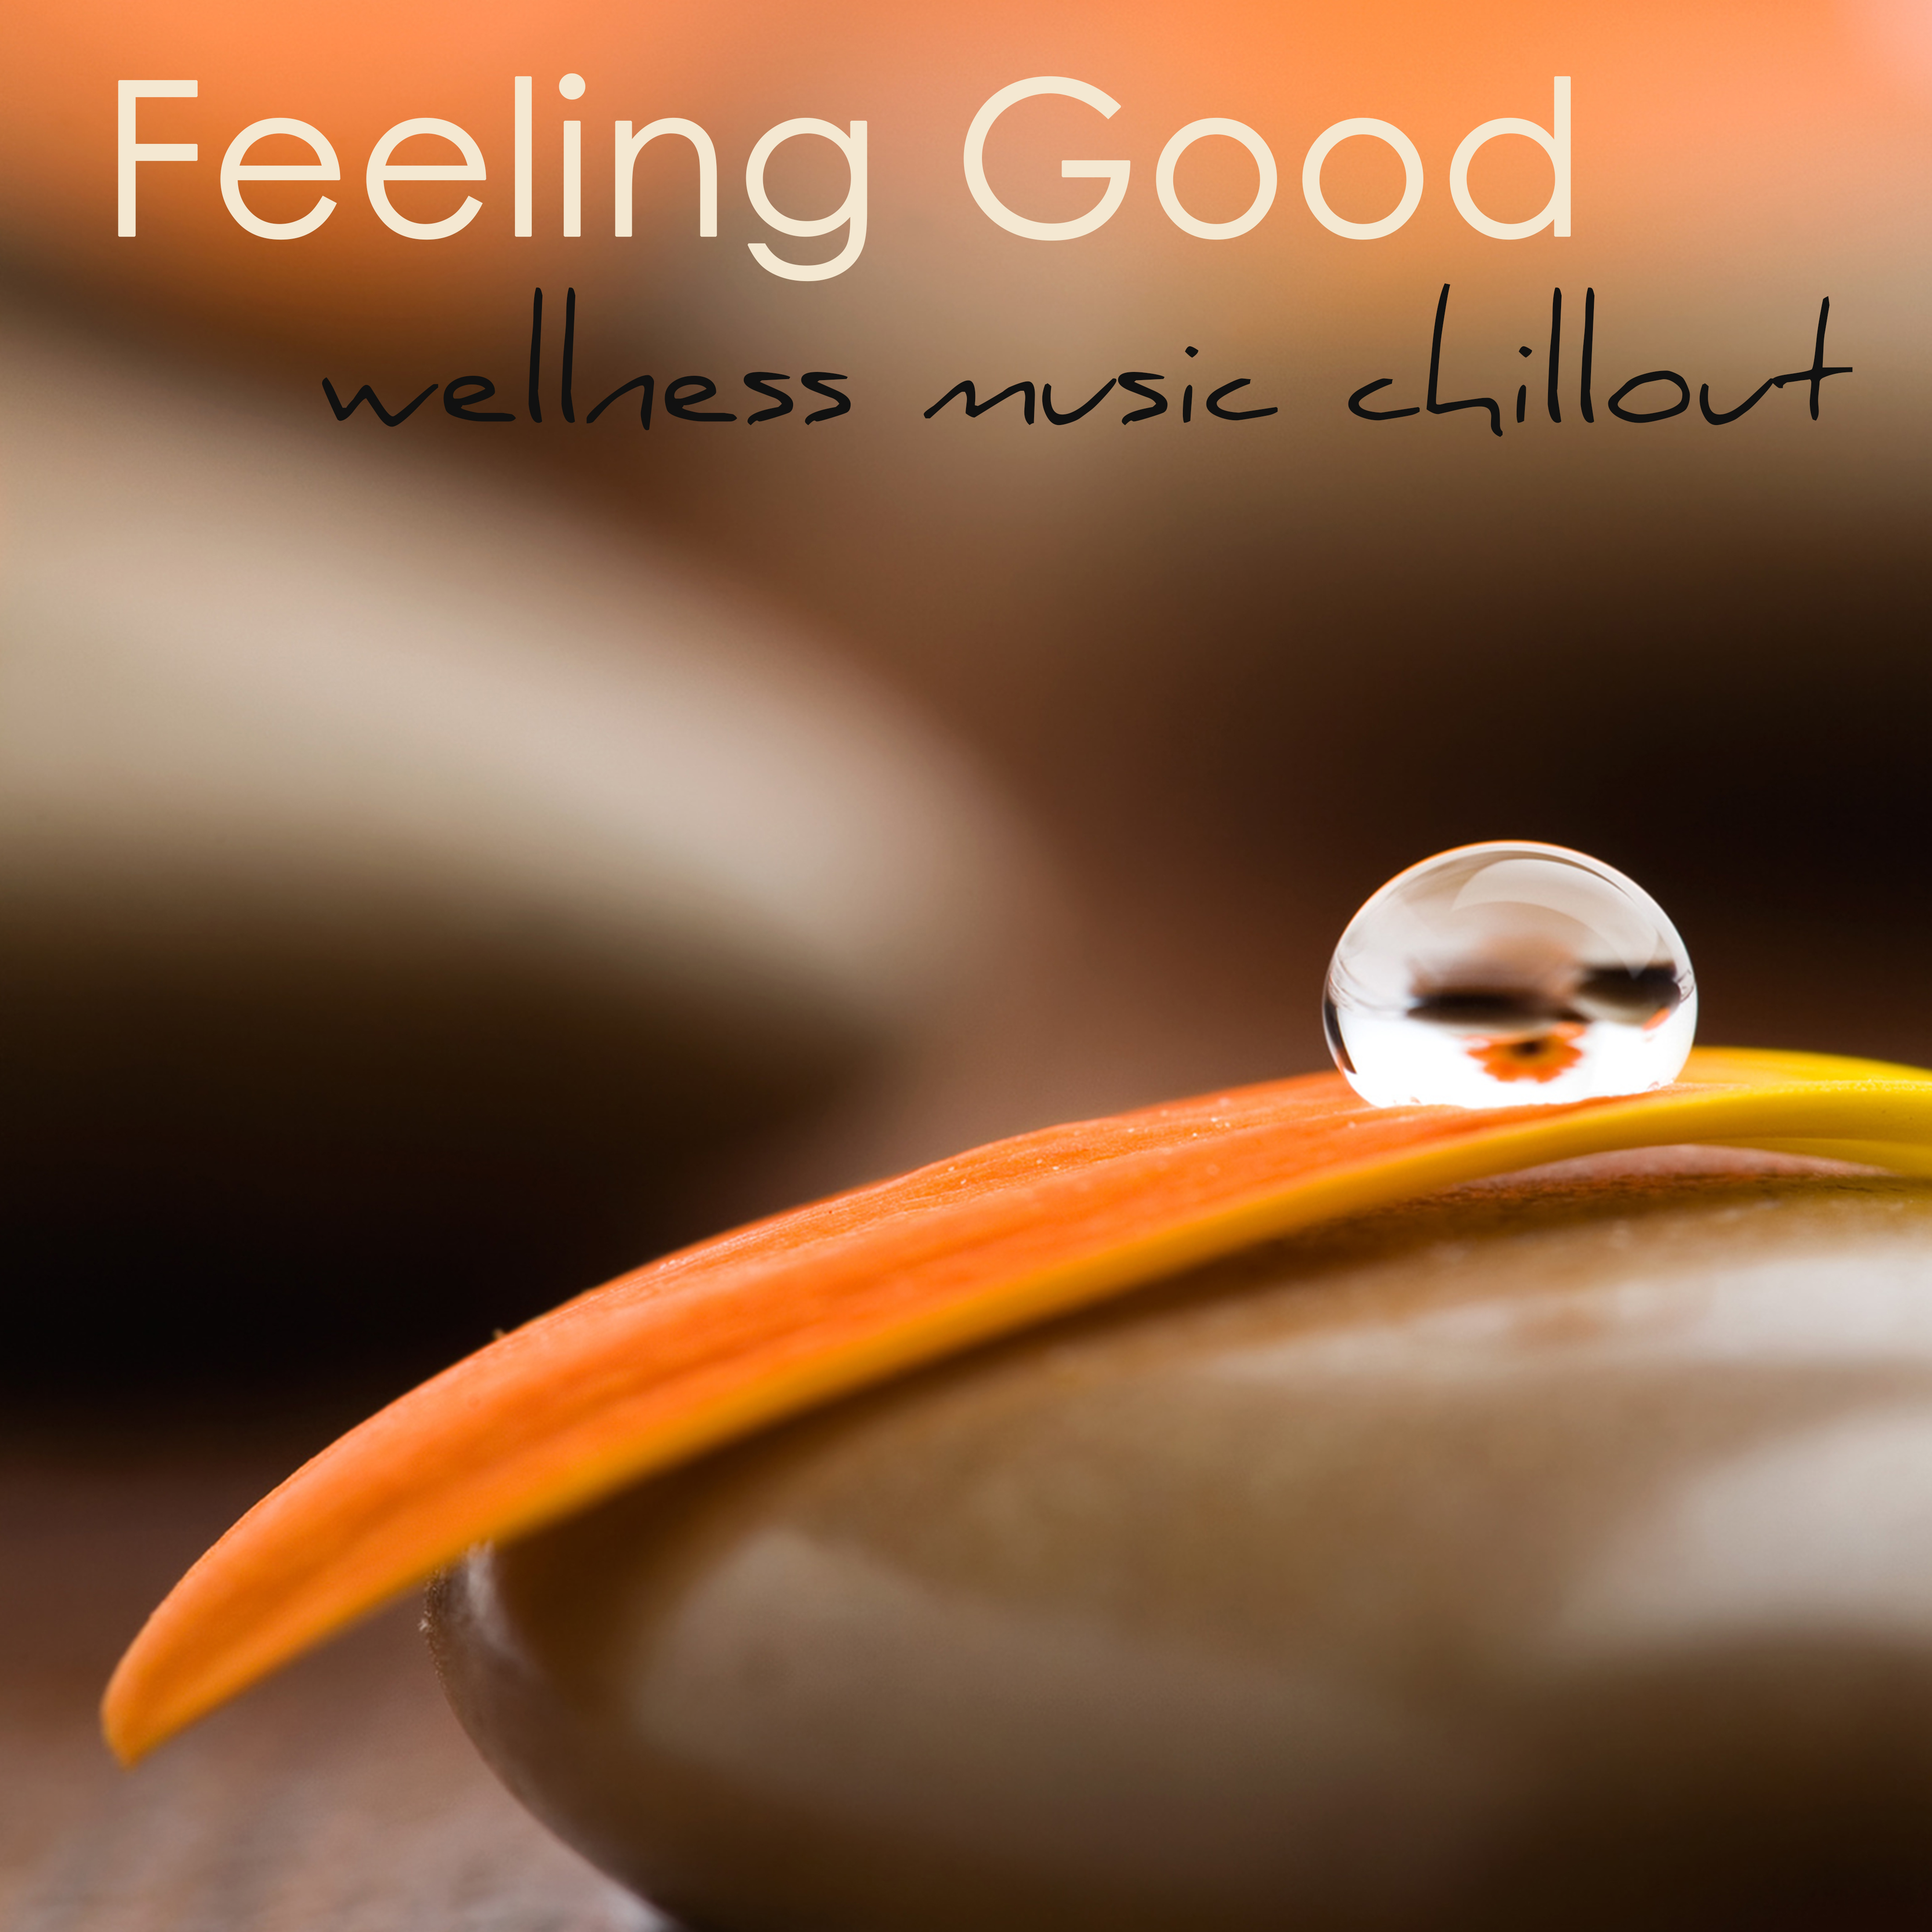 Feeling Good – Wellness Music Chillout for Beauty Spa, Massage, Well-Being, Relaxation & Vital Energy